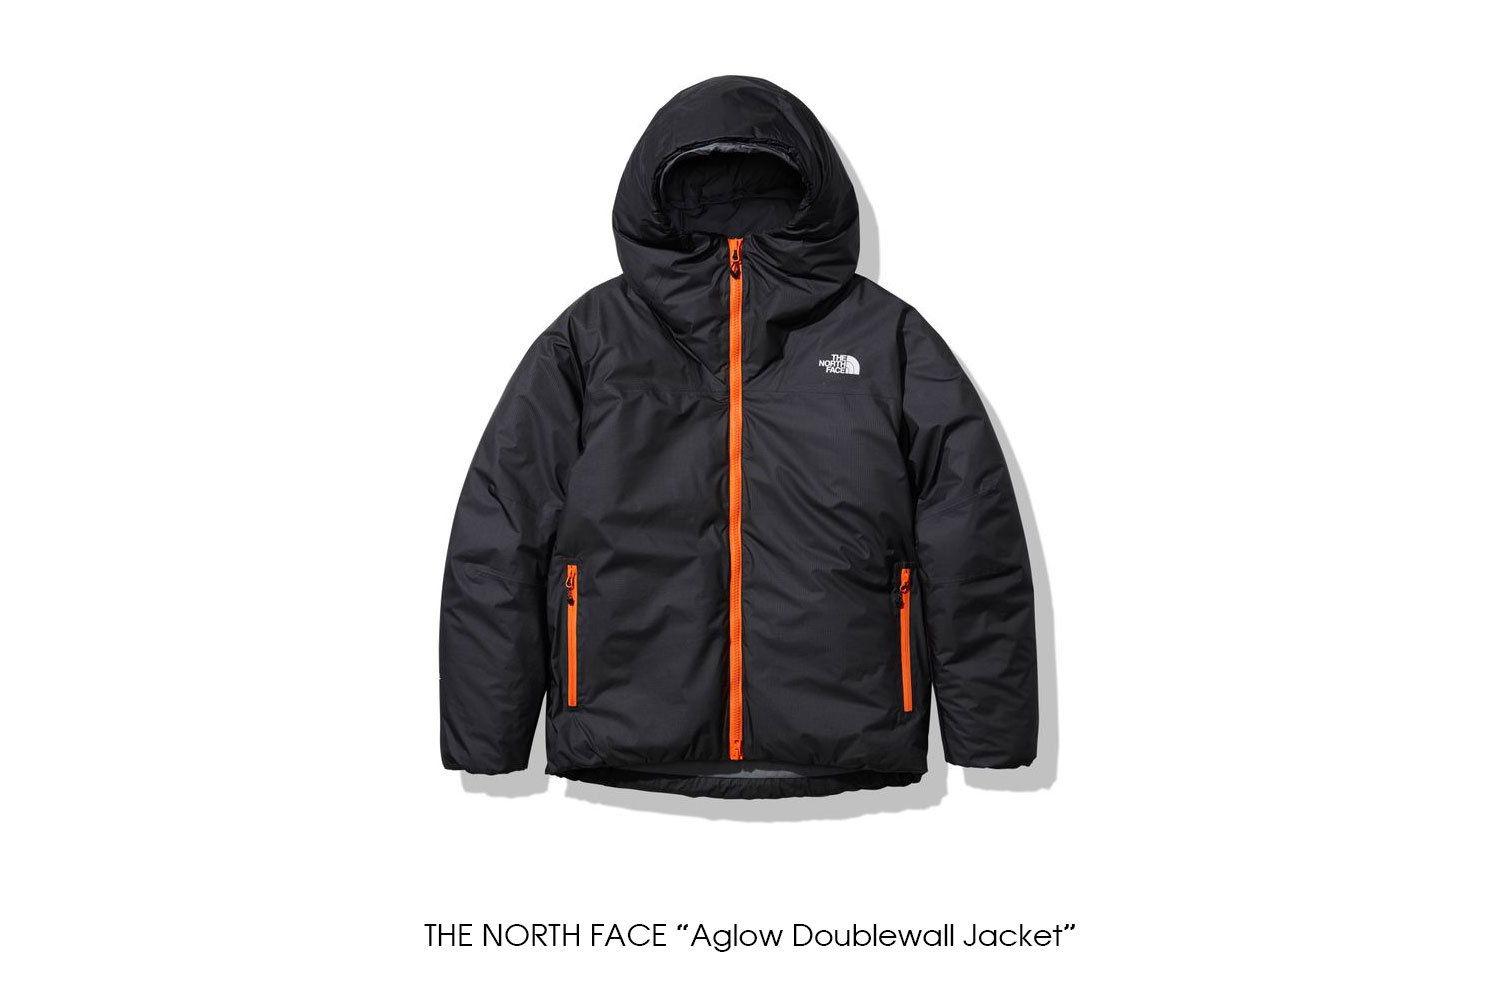 THE NORTH FACE "Aglow Doublewall Jacket"